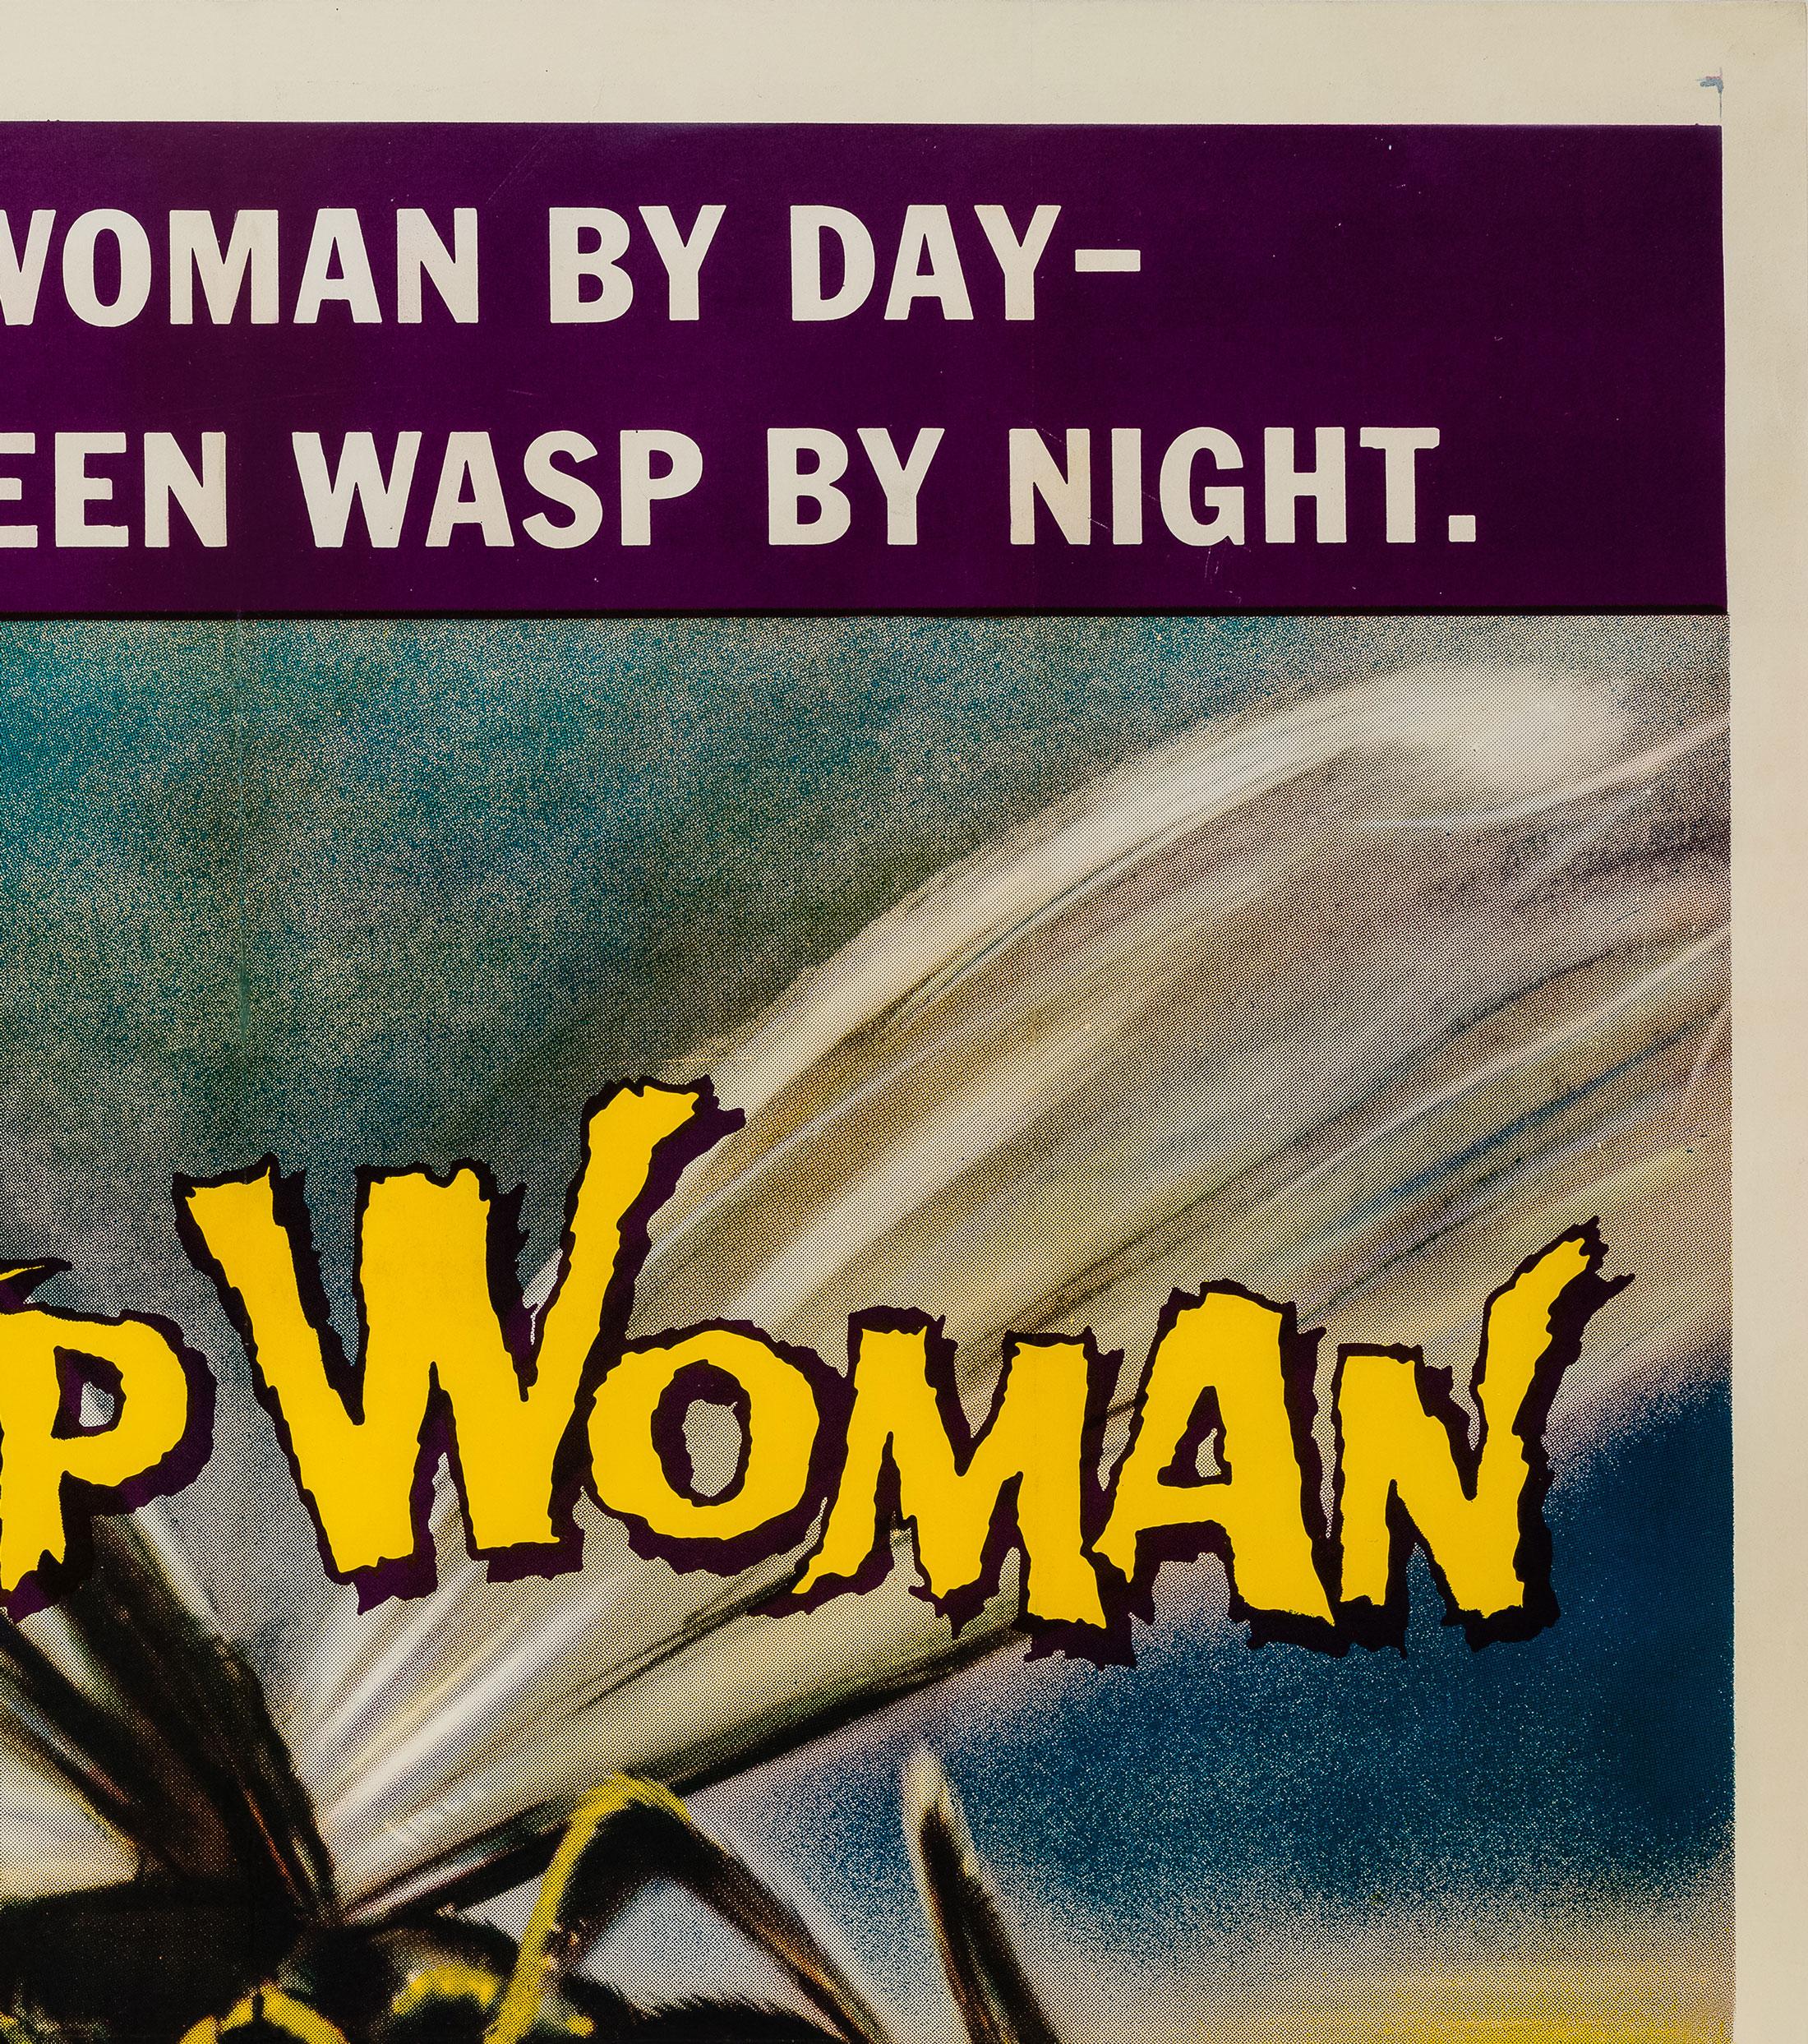 Superb vintage film poster for Roger Corman's movie The Wasp Woman. Classic 1950s horror artwork and looks magnificent on the scale of the US three sheet.

Actual poster size is 41 1/2 x 78 7/8 inches (42 3/4 x 80 1/4 inches including the